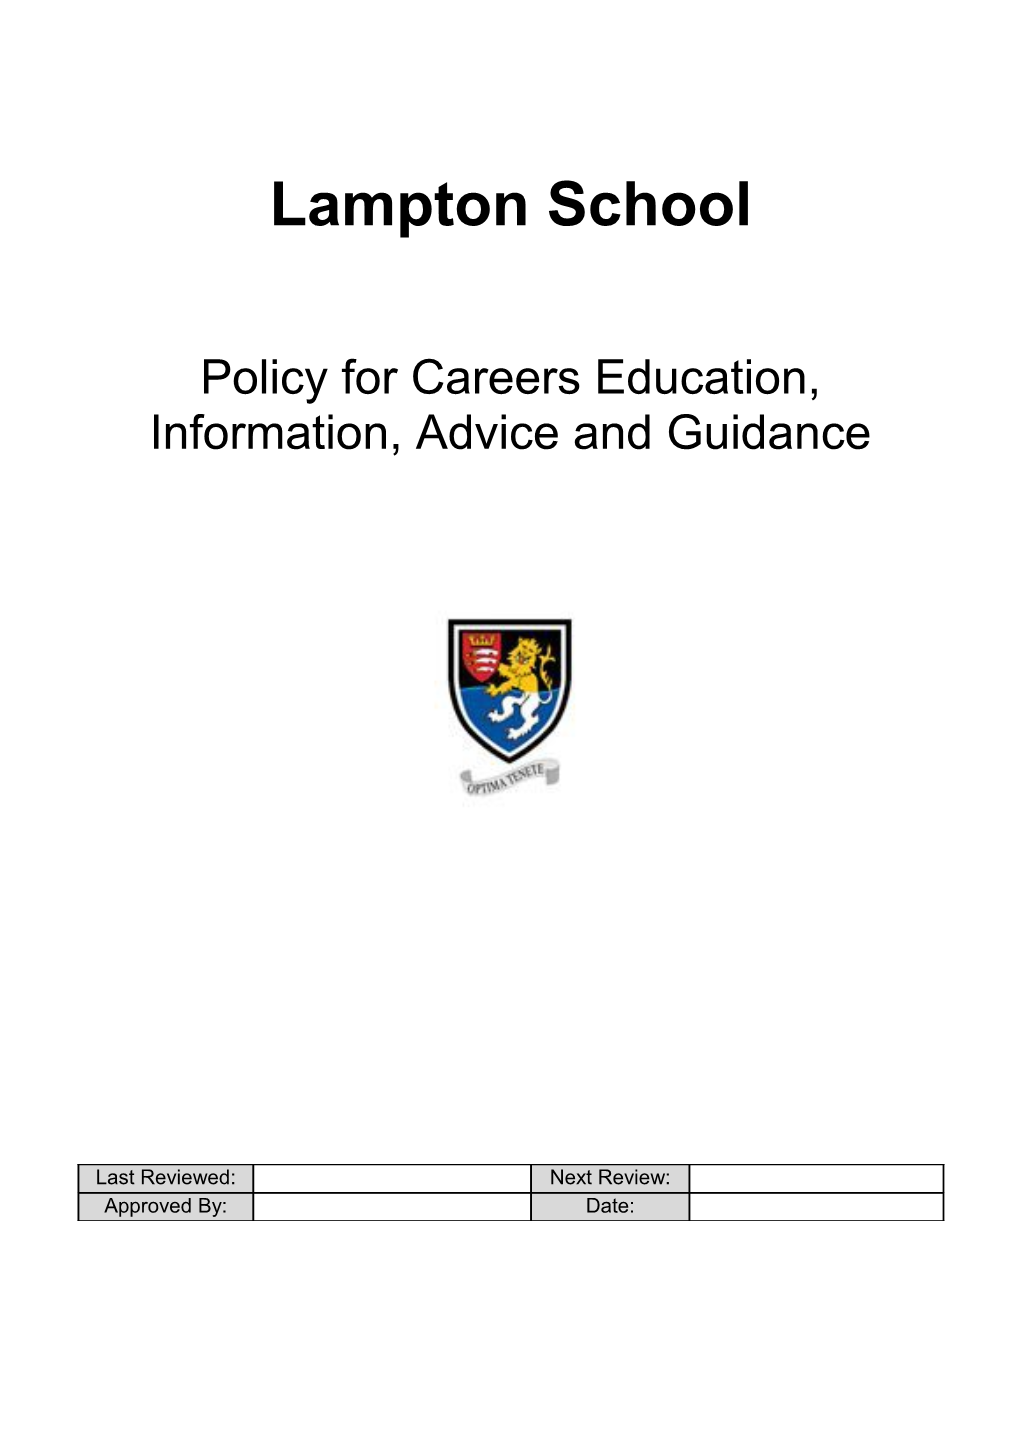 Policy for Careers Education, Information, Advice and Guidance